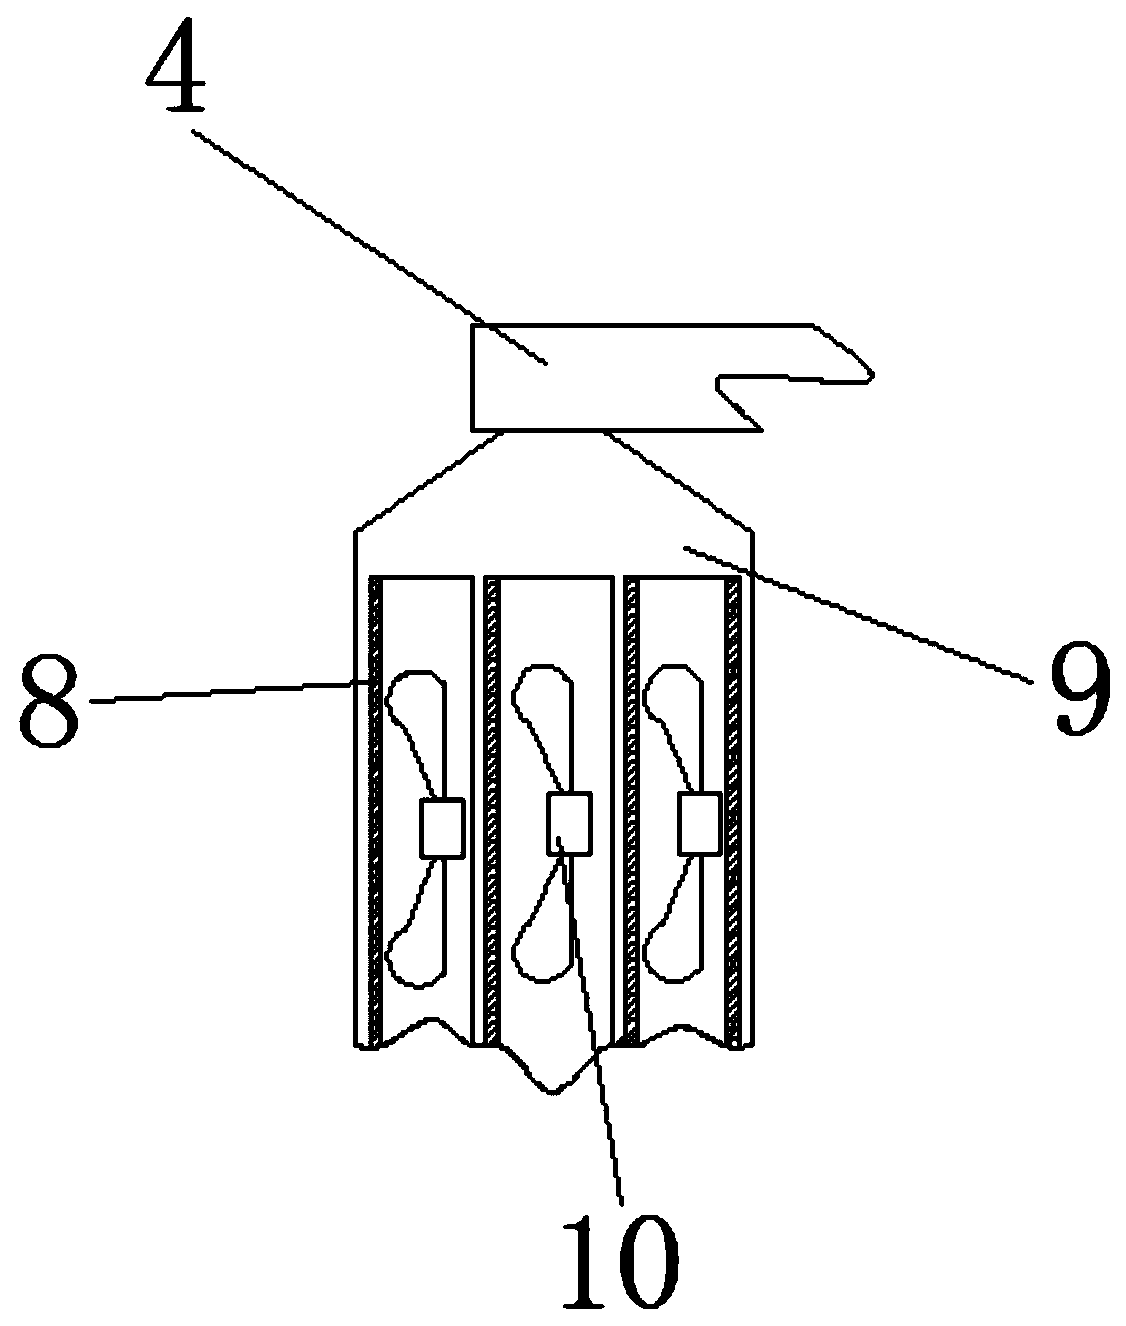 Heat dissipation structure of computer network server